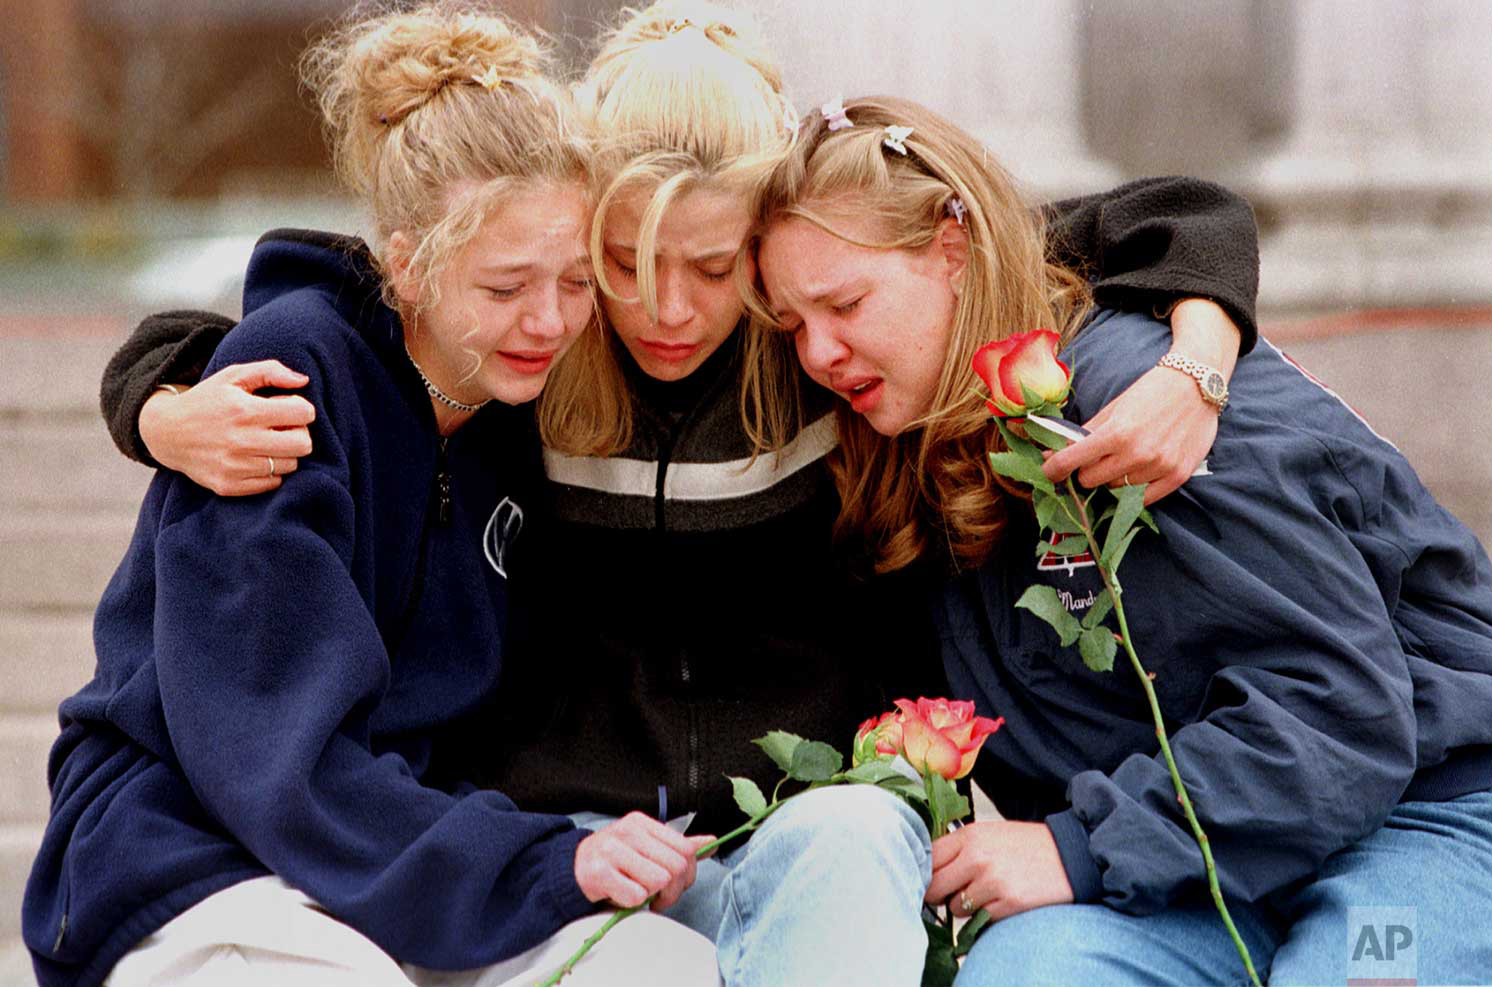  From left, Rachel Ruth, Rhianna Cheek and Mandi Annibel, all 16-year-old sophomores at Heritage High School in Littleton, Colo., console each other during a vigil service in Denver's Civic Center Park late Wednesday, April 21, 1999, to honor the vic